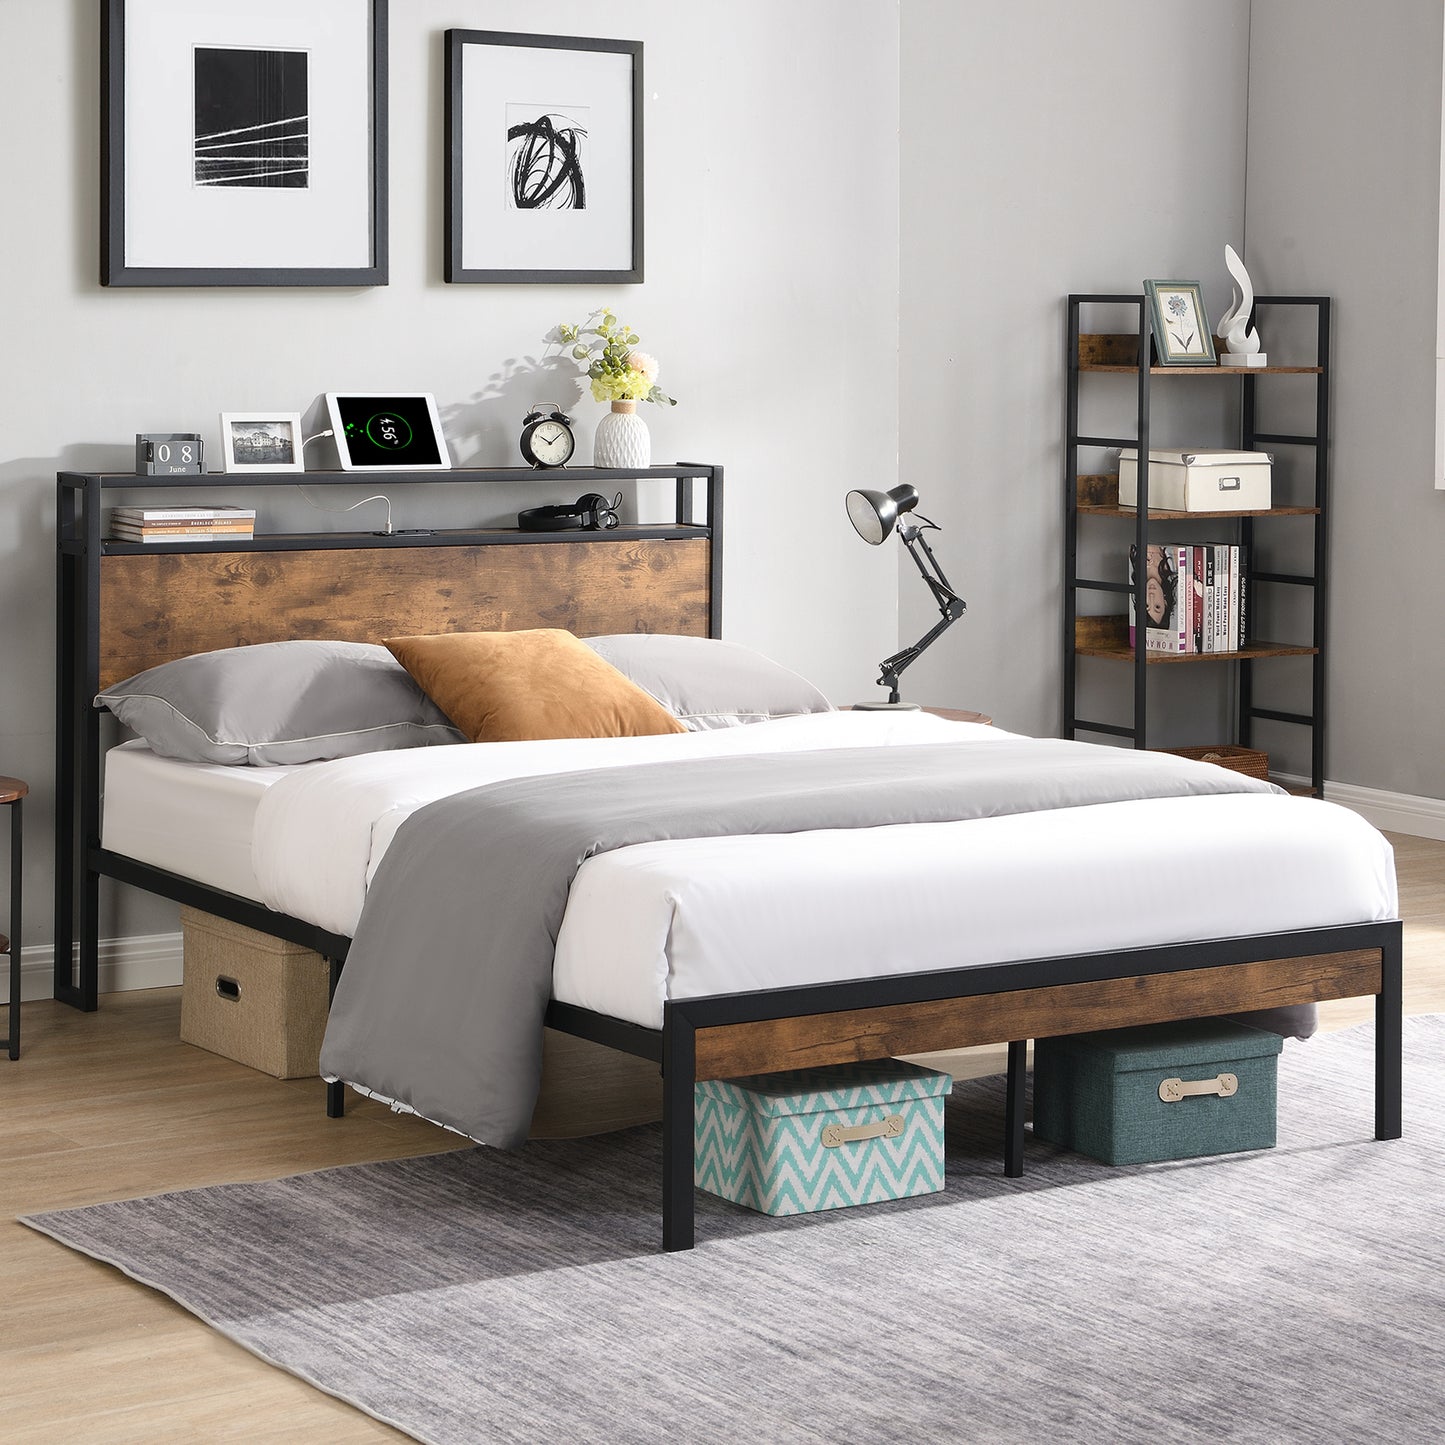 SYNGAR Platform Bed Frame Full Size with Wooden Storage Headboard and USB Ports, Industrial Metal Full Bed Frame with Slat Support, Noise Free, No Box Spring Needed, Rustic Brown